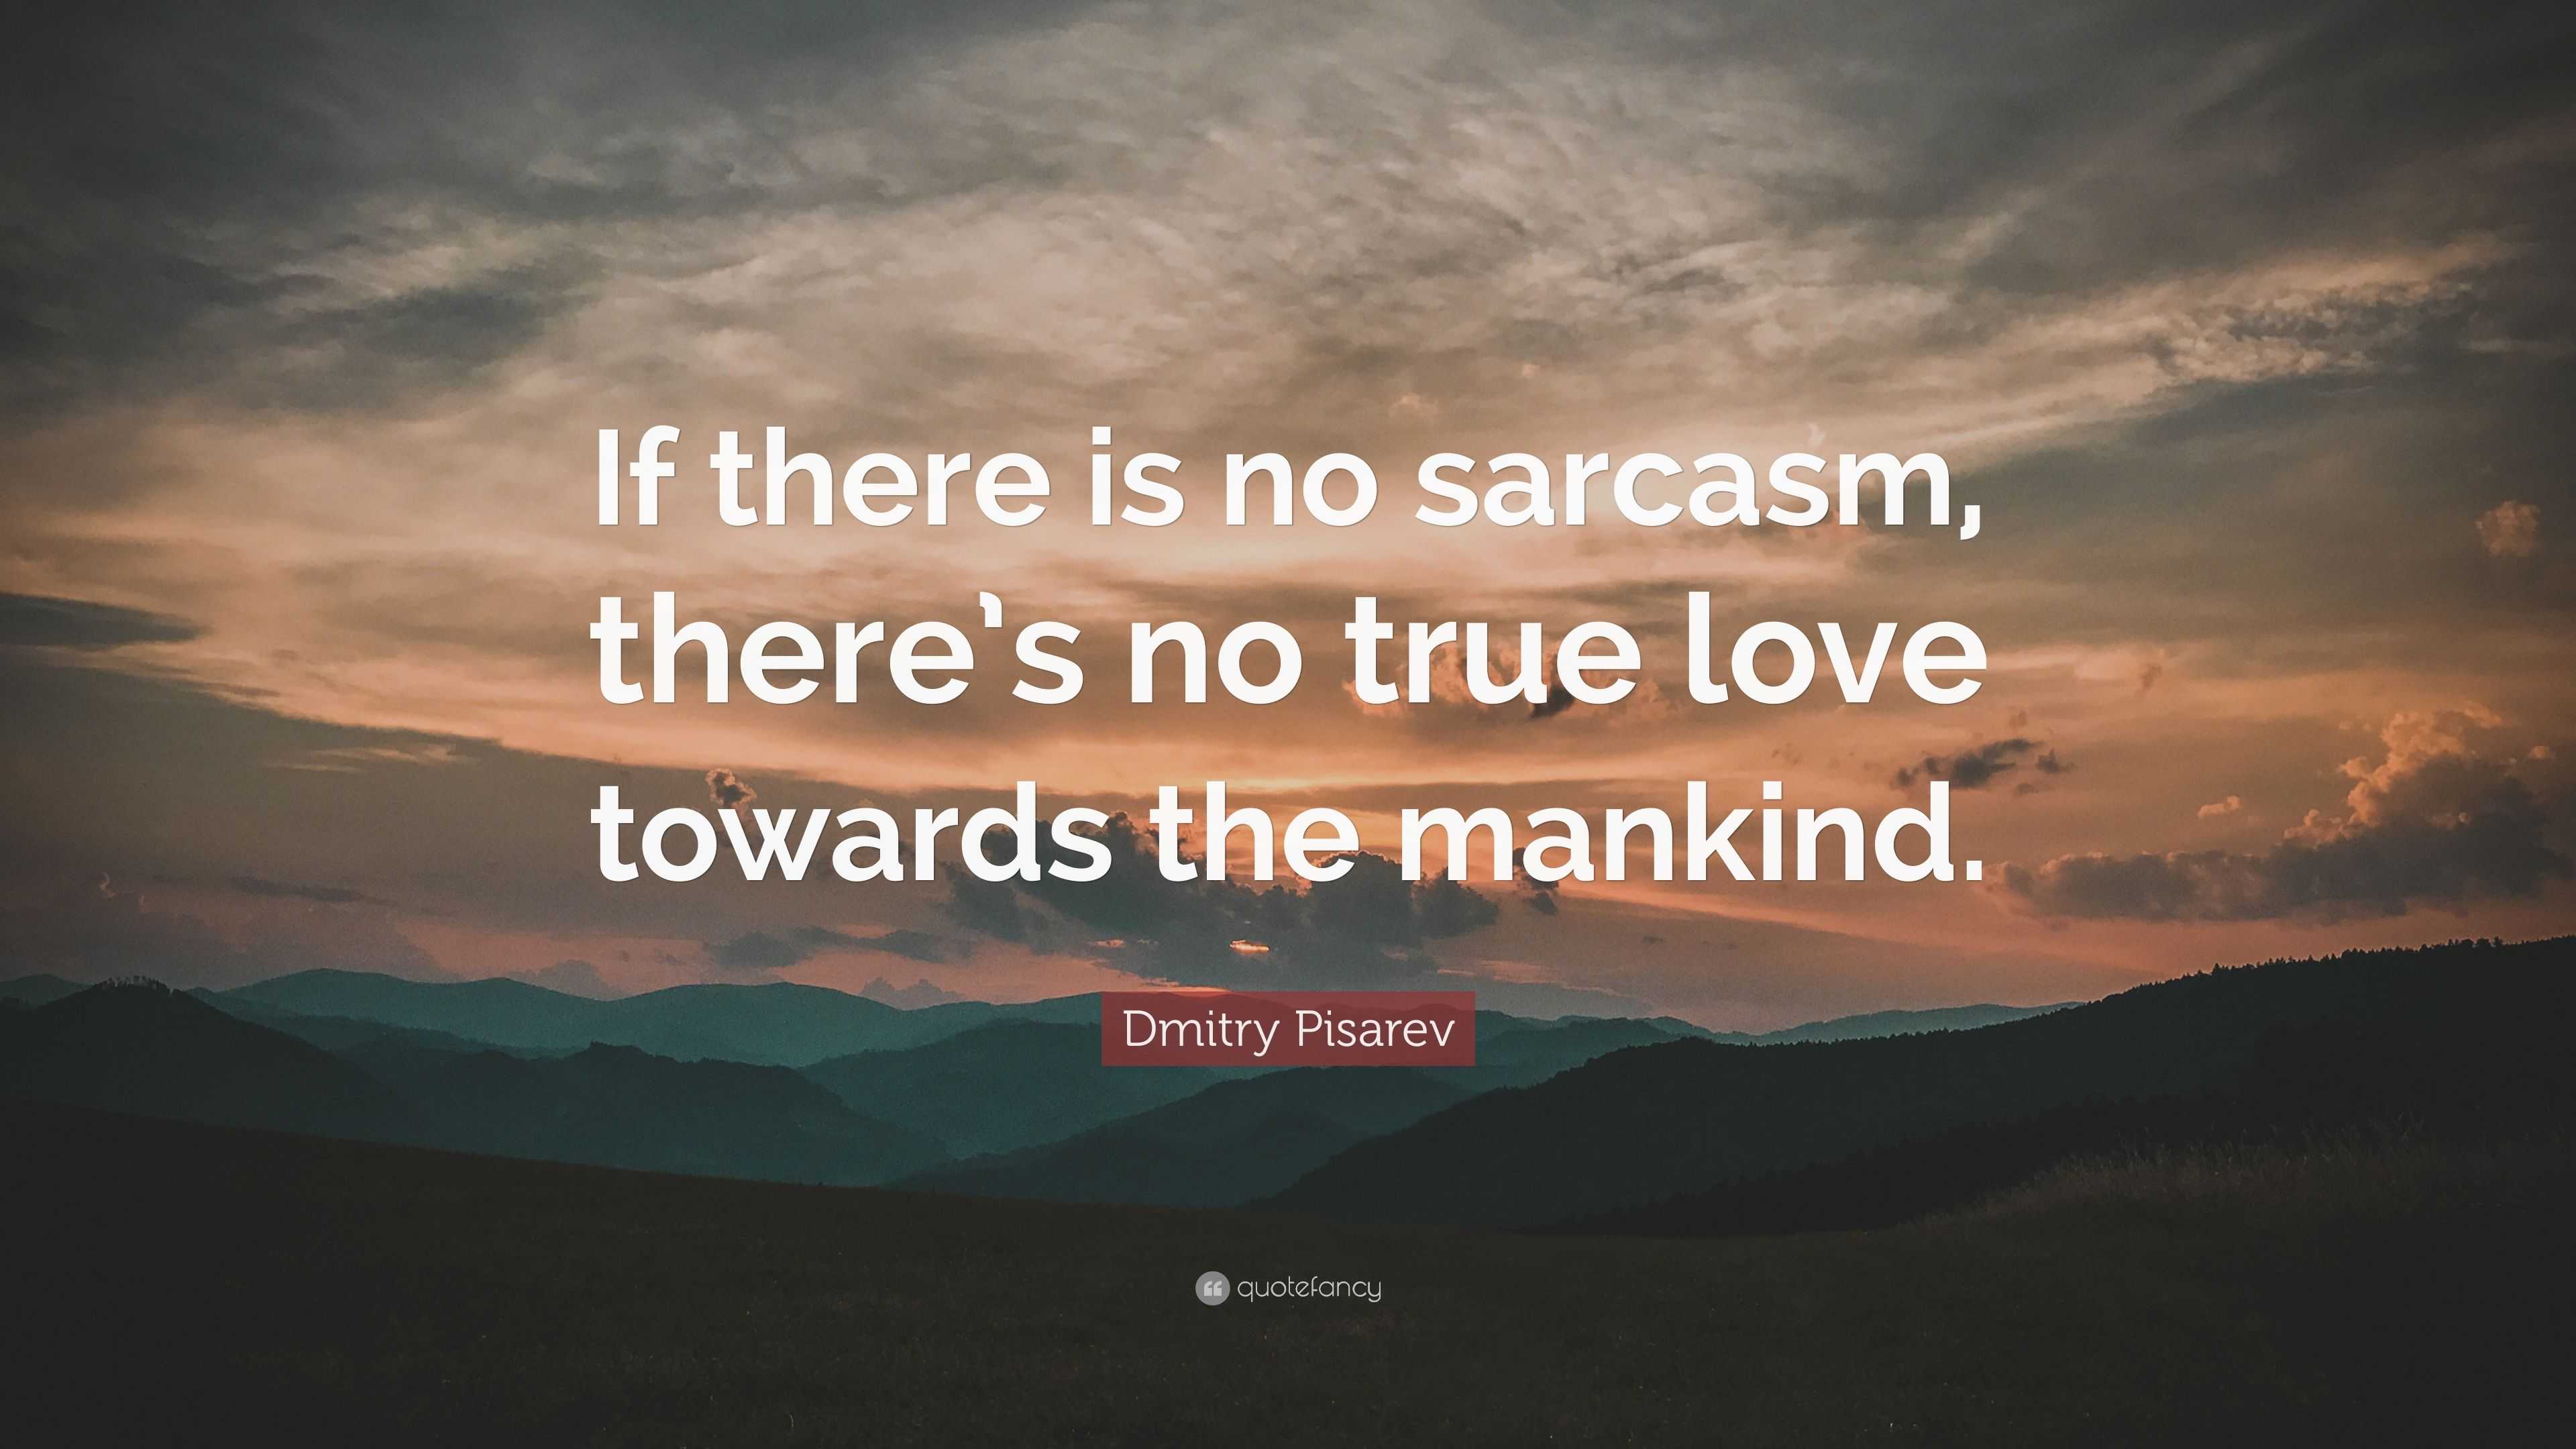 Dmitry Pisarev Quote “If there is no sarcasm there s no true love towards